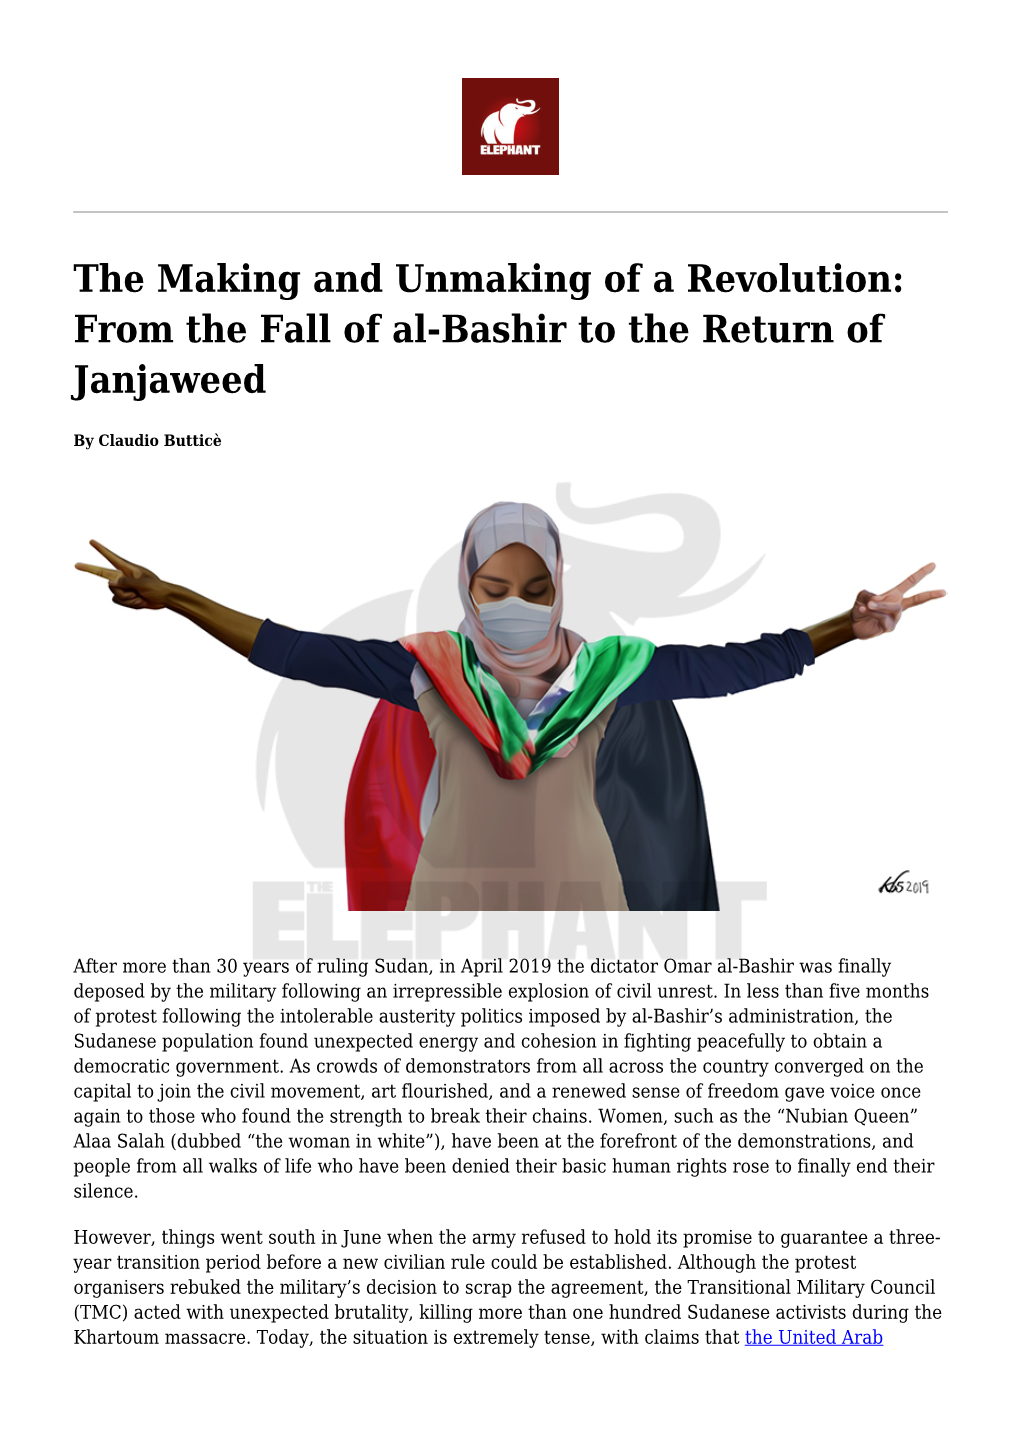 The Making and Unmaking of a Revolution: from the Fall of Al-Bashir to the Return of Janjaweed